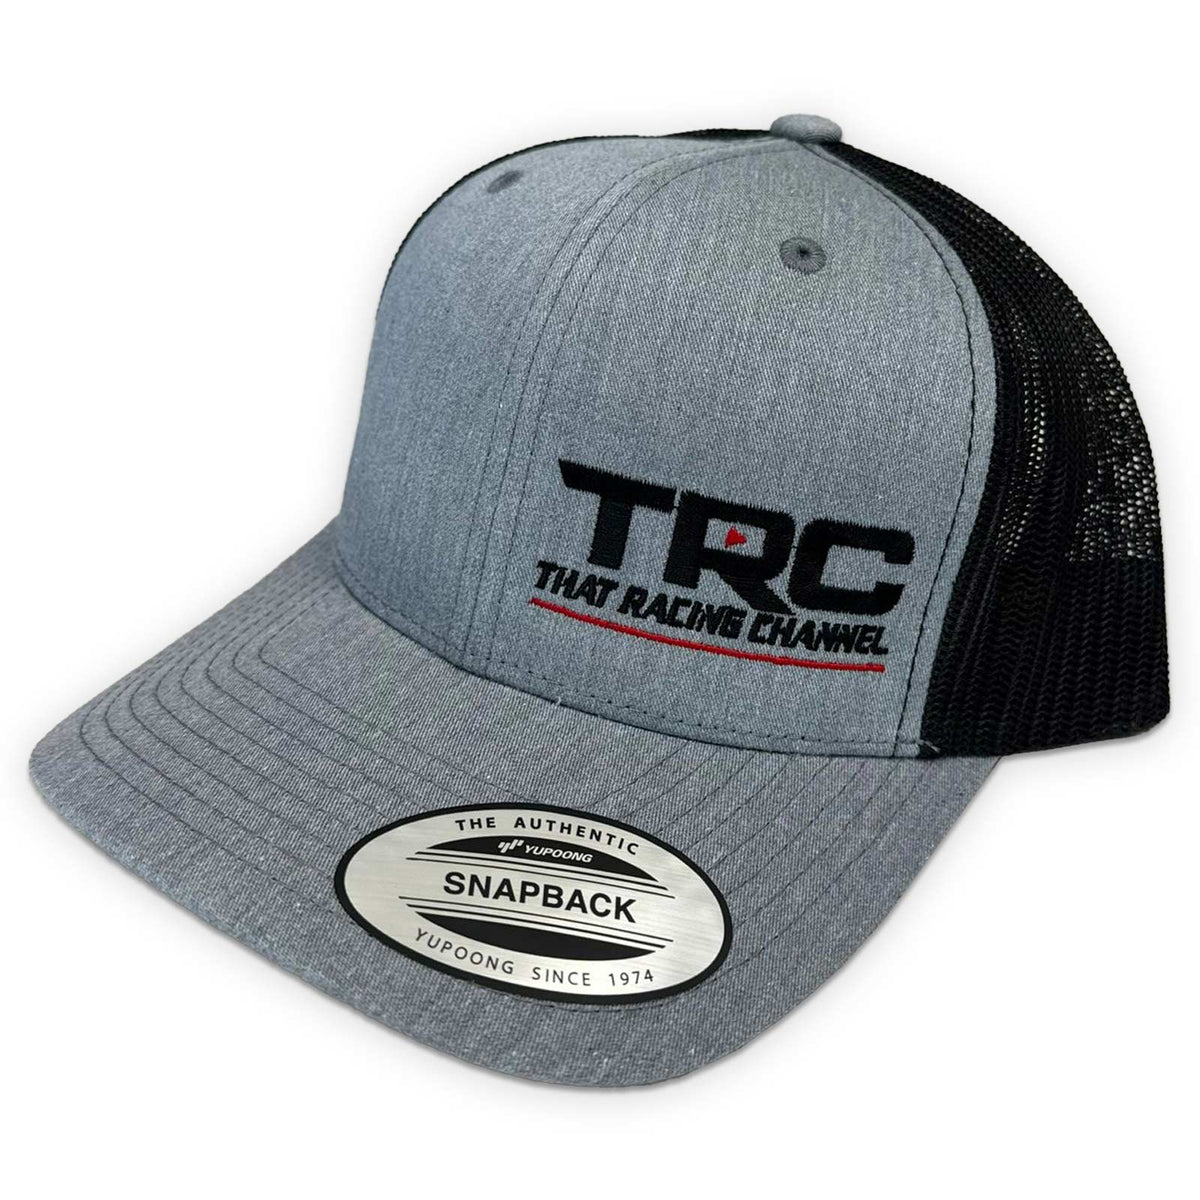 TRC Hat - That Racing Channel (700 Entries)